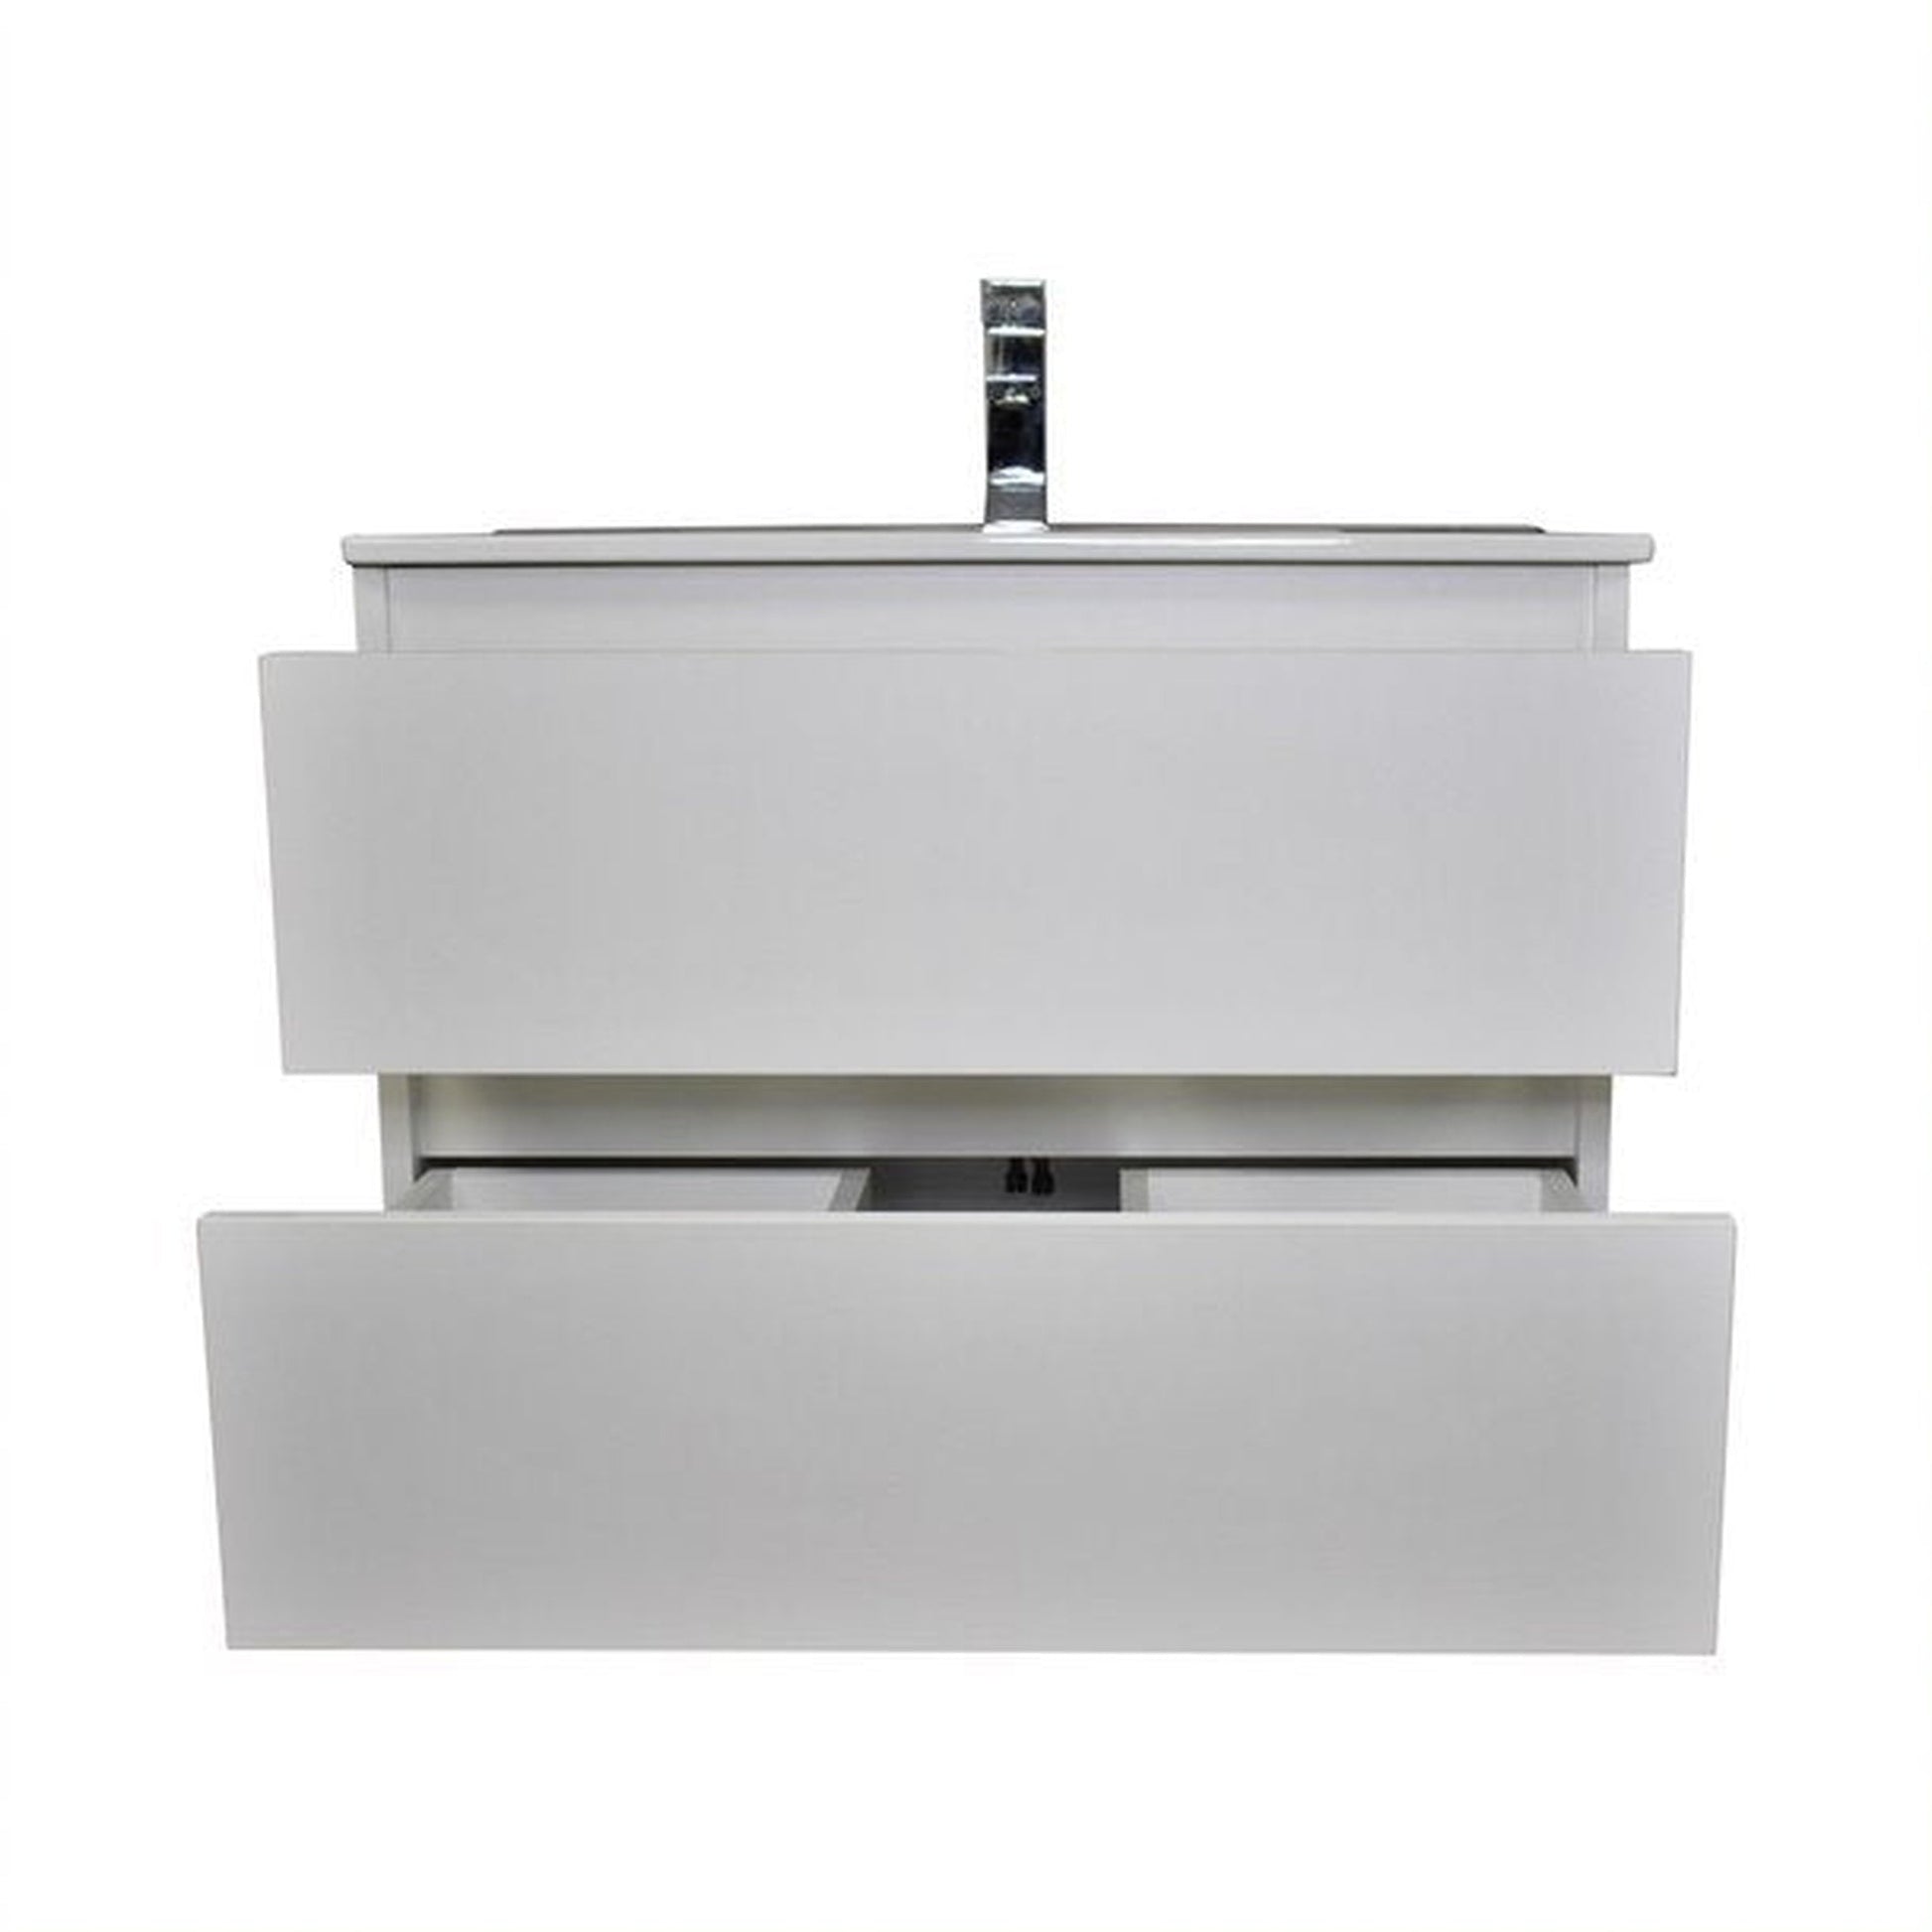 Volpa USA Salt 30" x 18" White Wall-Mounted Floating Bathroom Vanity With Drawers, Integrated Porcelain Ceramic Top and Integrated Ceramic Sink